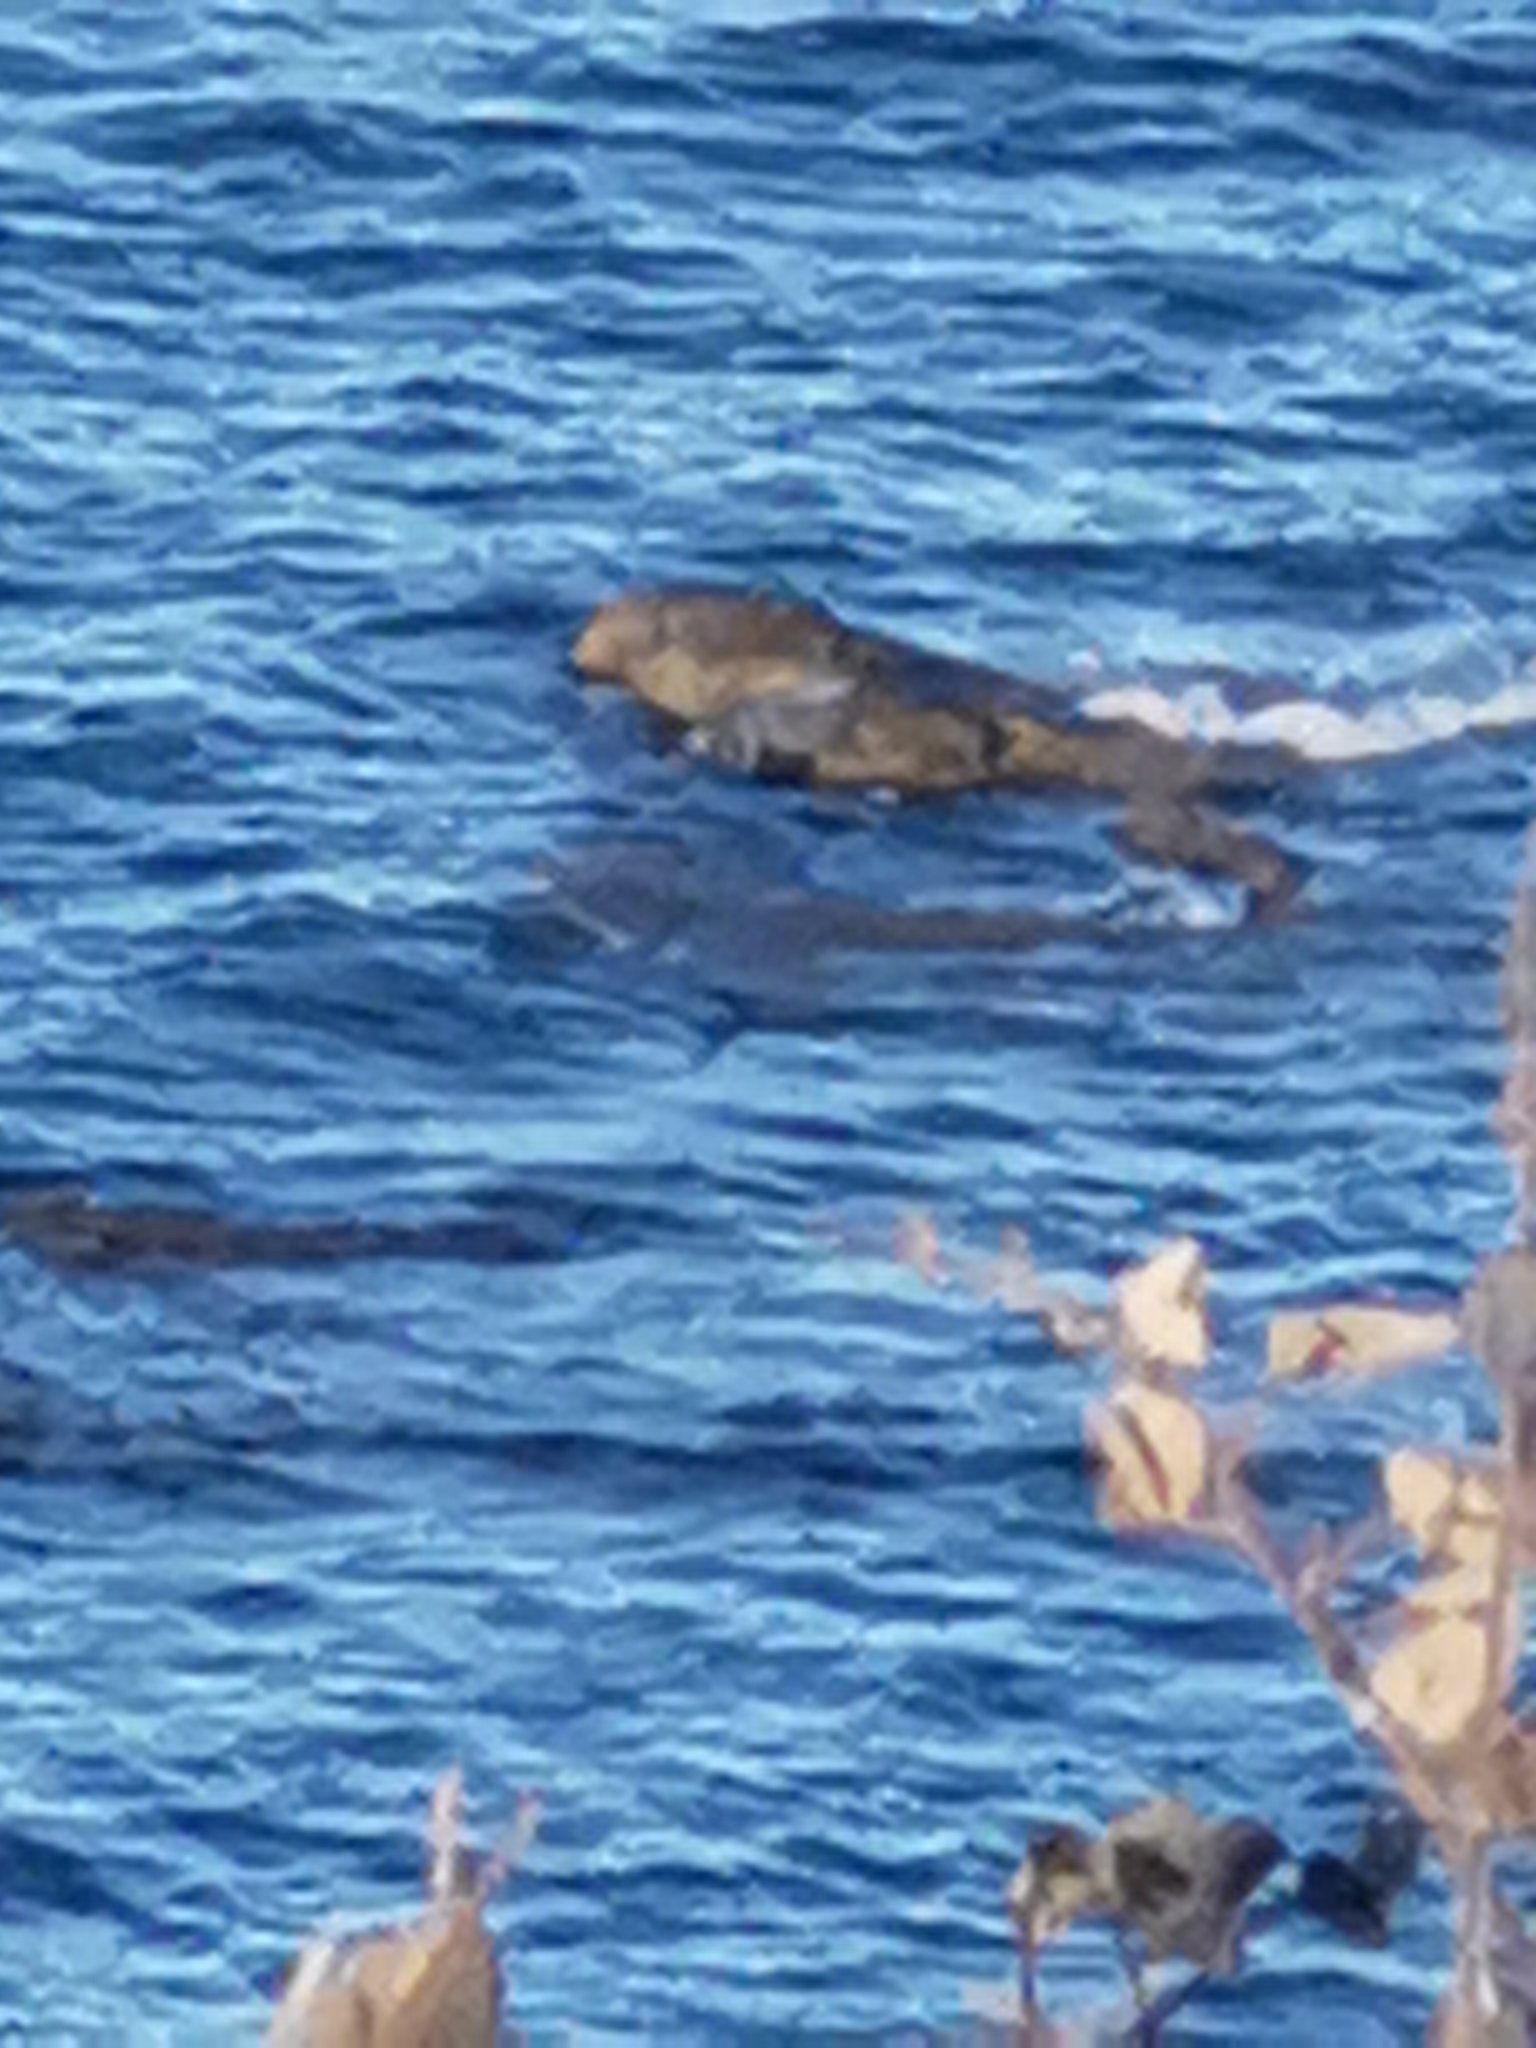 Bradford mum insists she saw three 'huge' crocodiles swimming in sea off Filey - but experts brand sighting 'vanishingly unlikely'